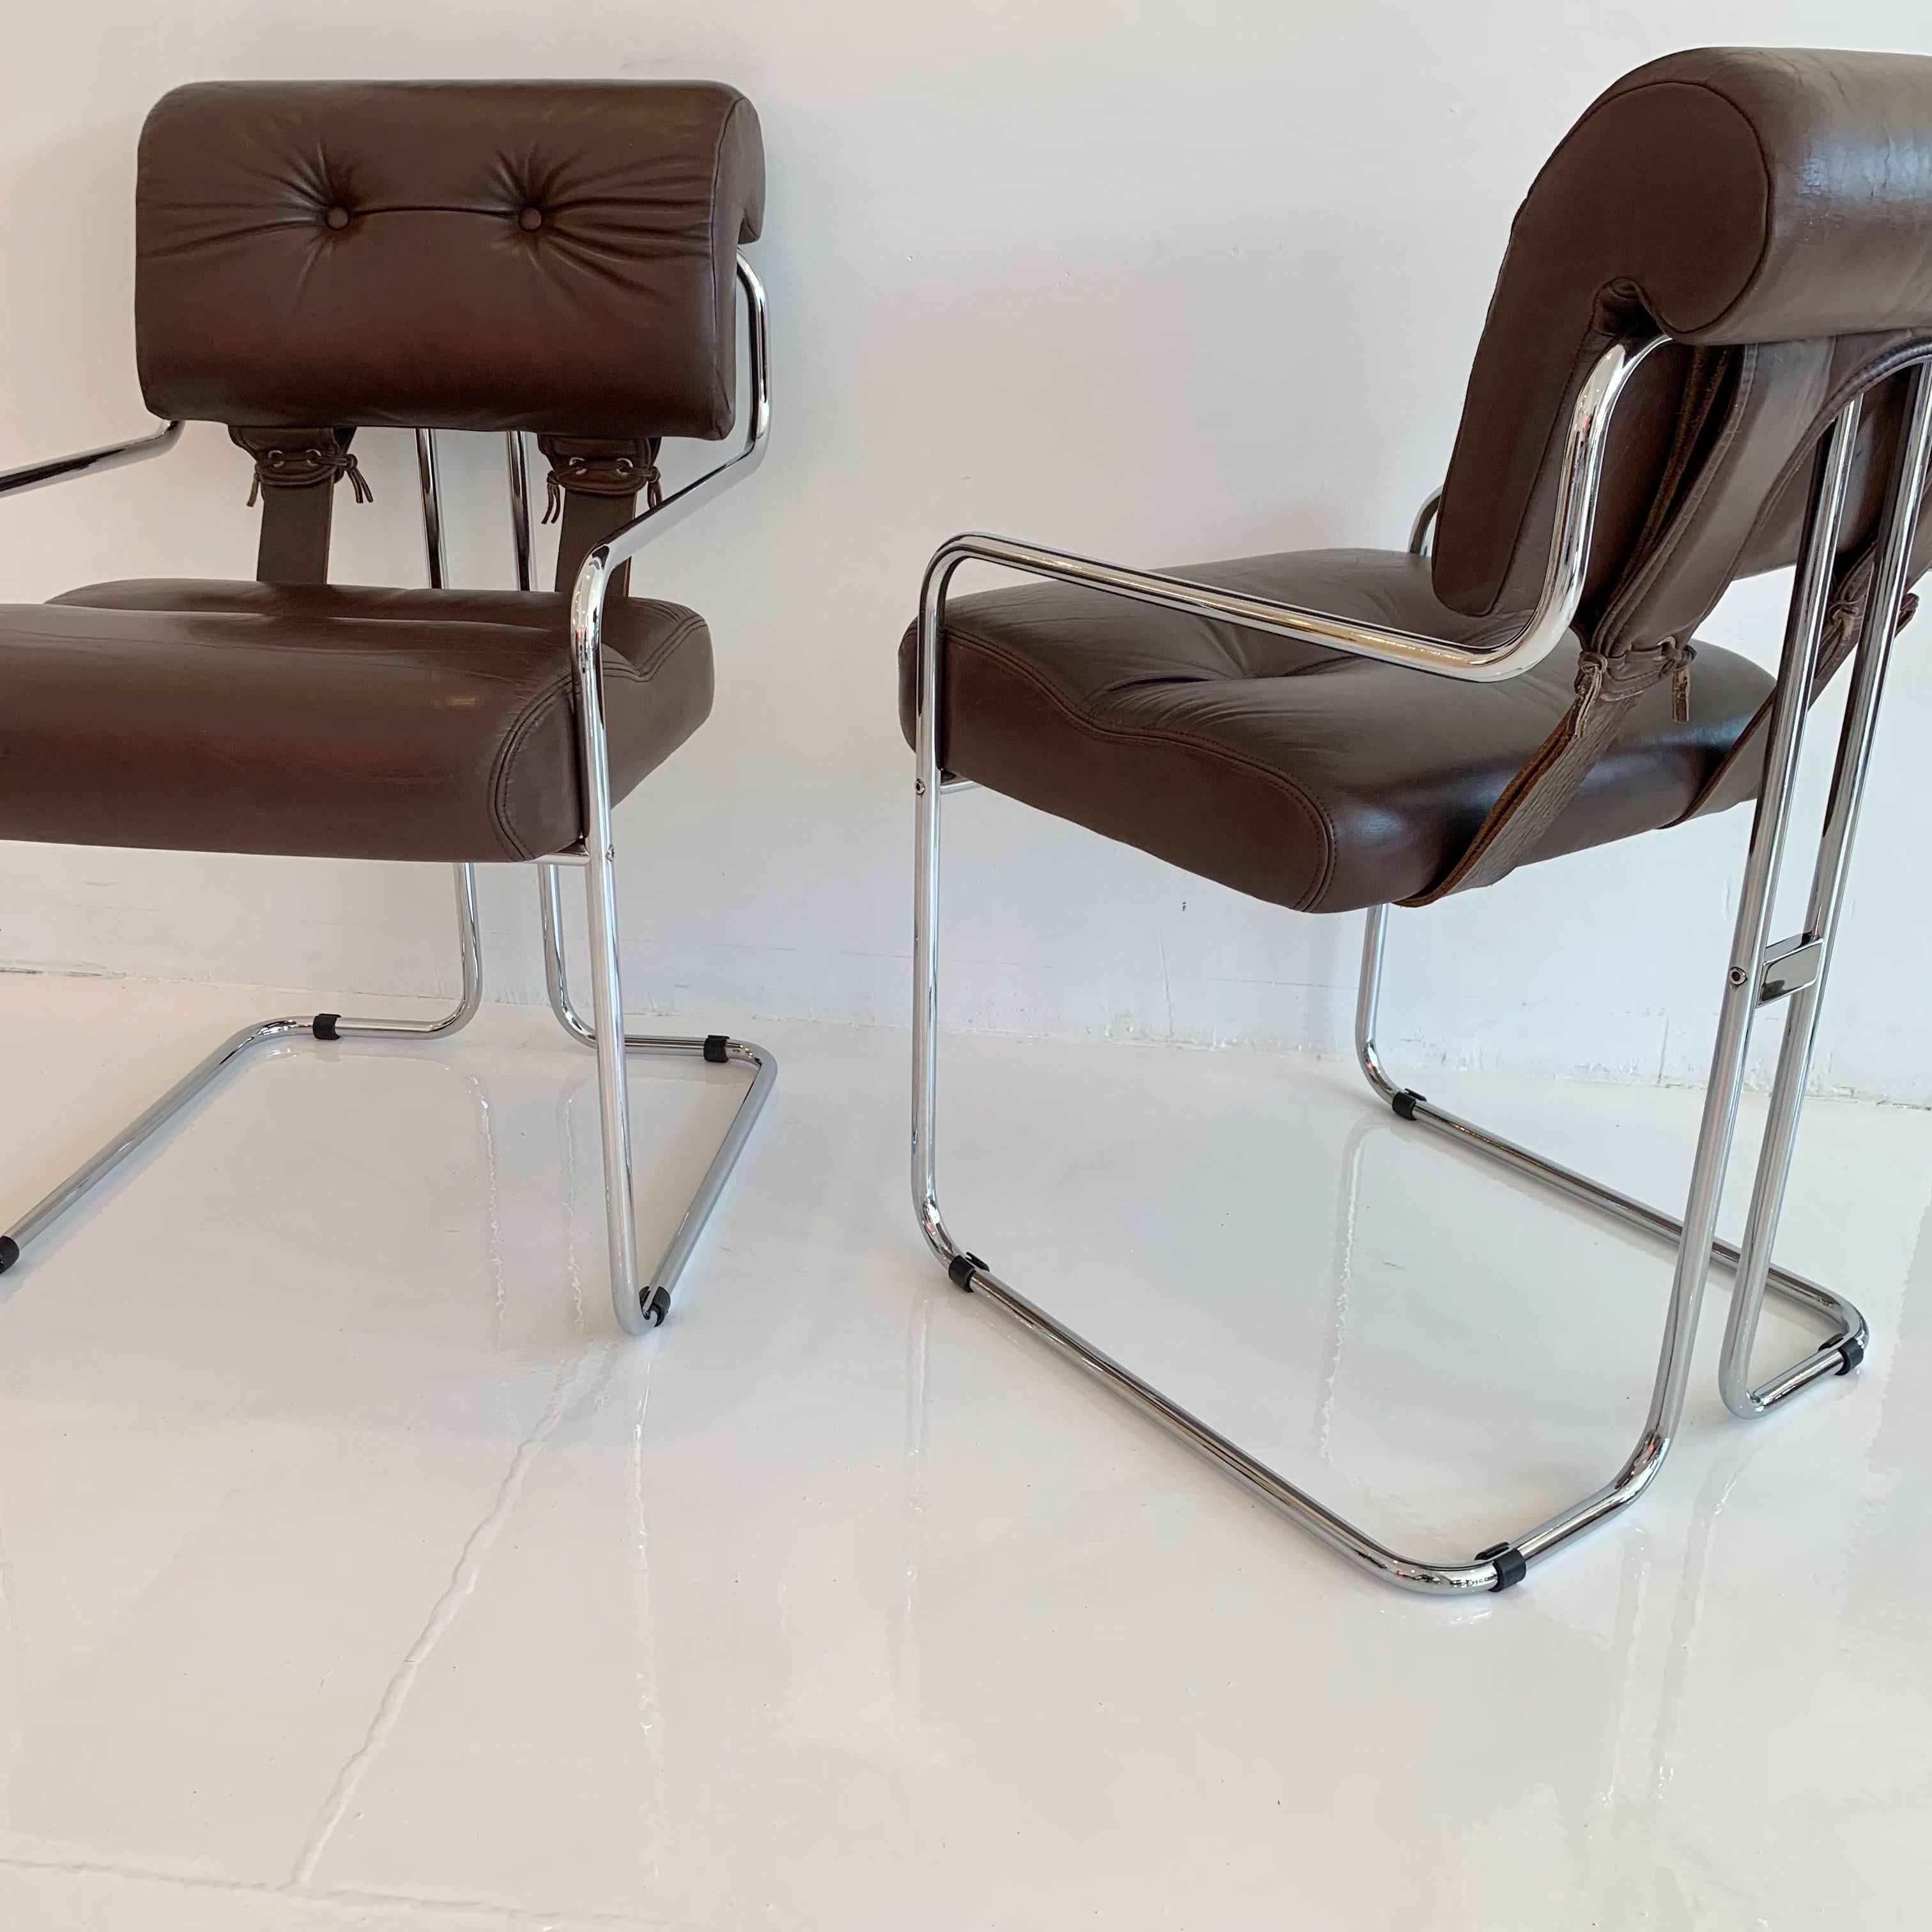 Classic leather 'Tucroma' chairs by Guido Faleschini for Pace. Tubular chrome chair with original brown leather. Metal is in good condition. Great color and patina. Very good vintage condition to leather. 

Priced as a set of 10.